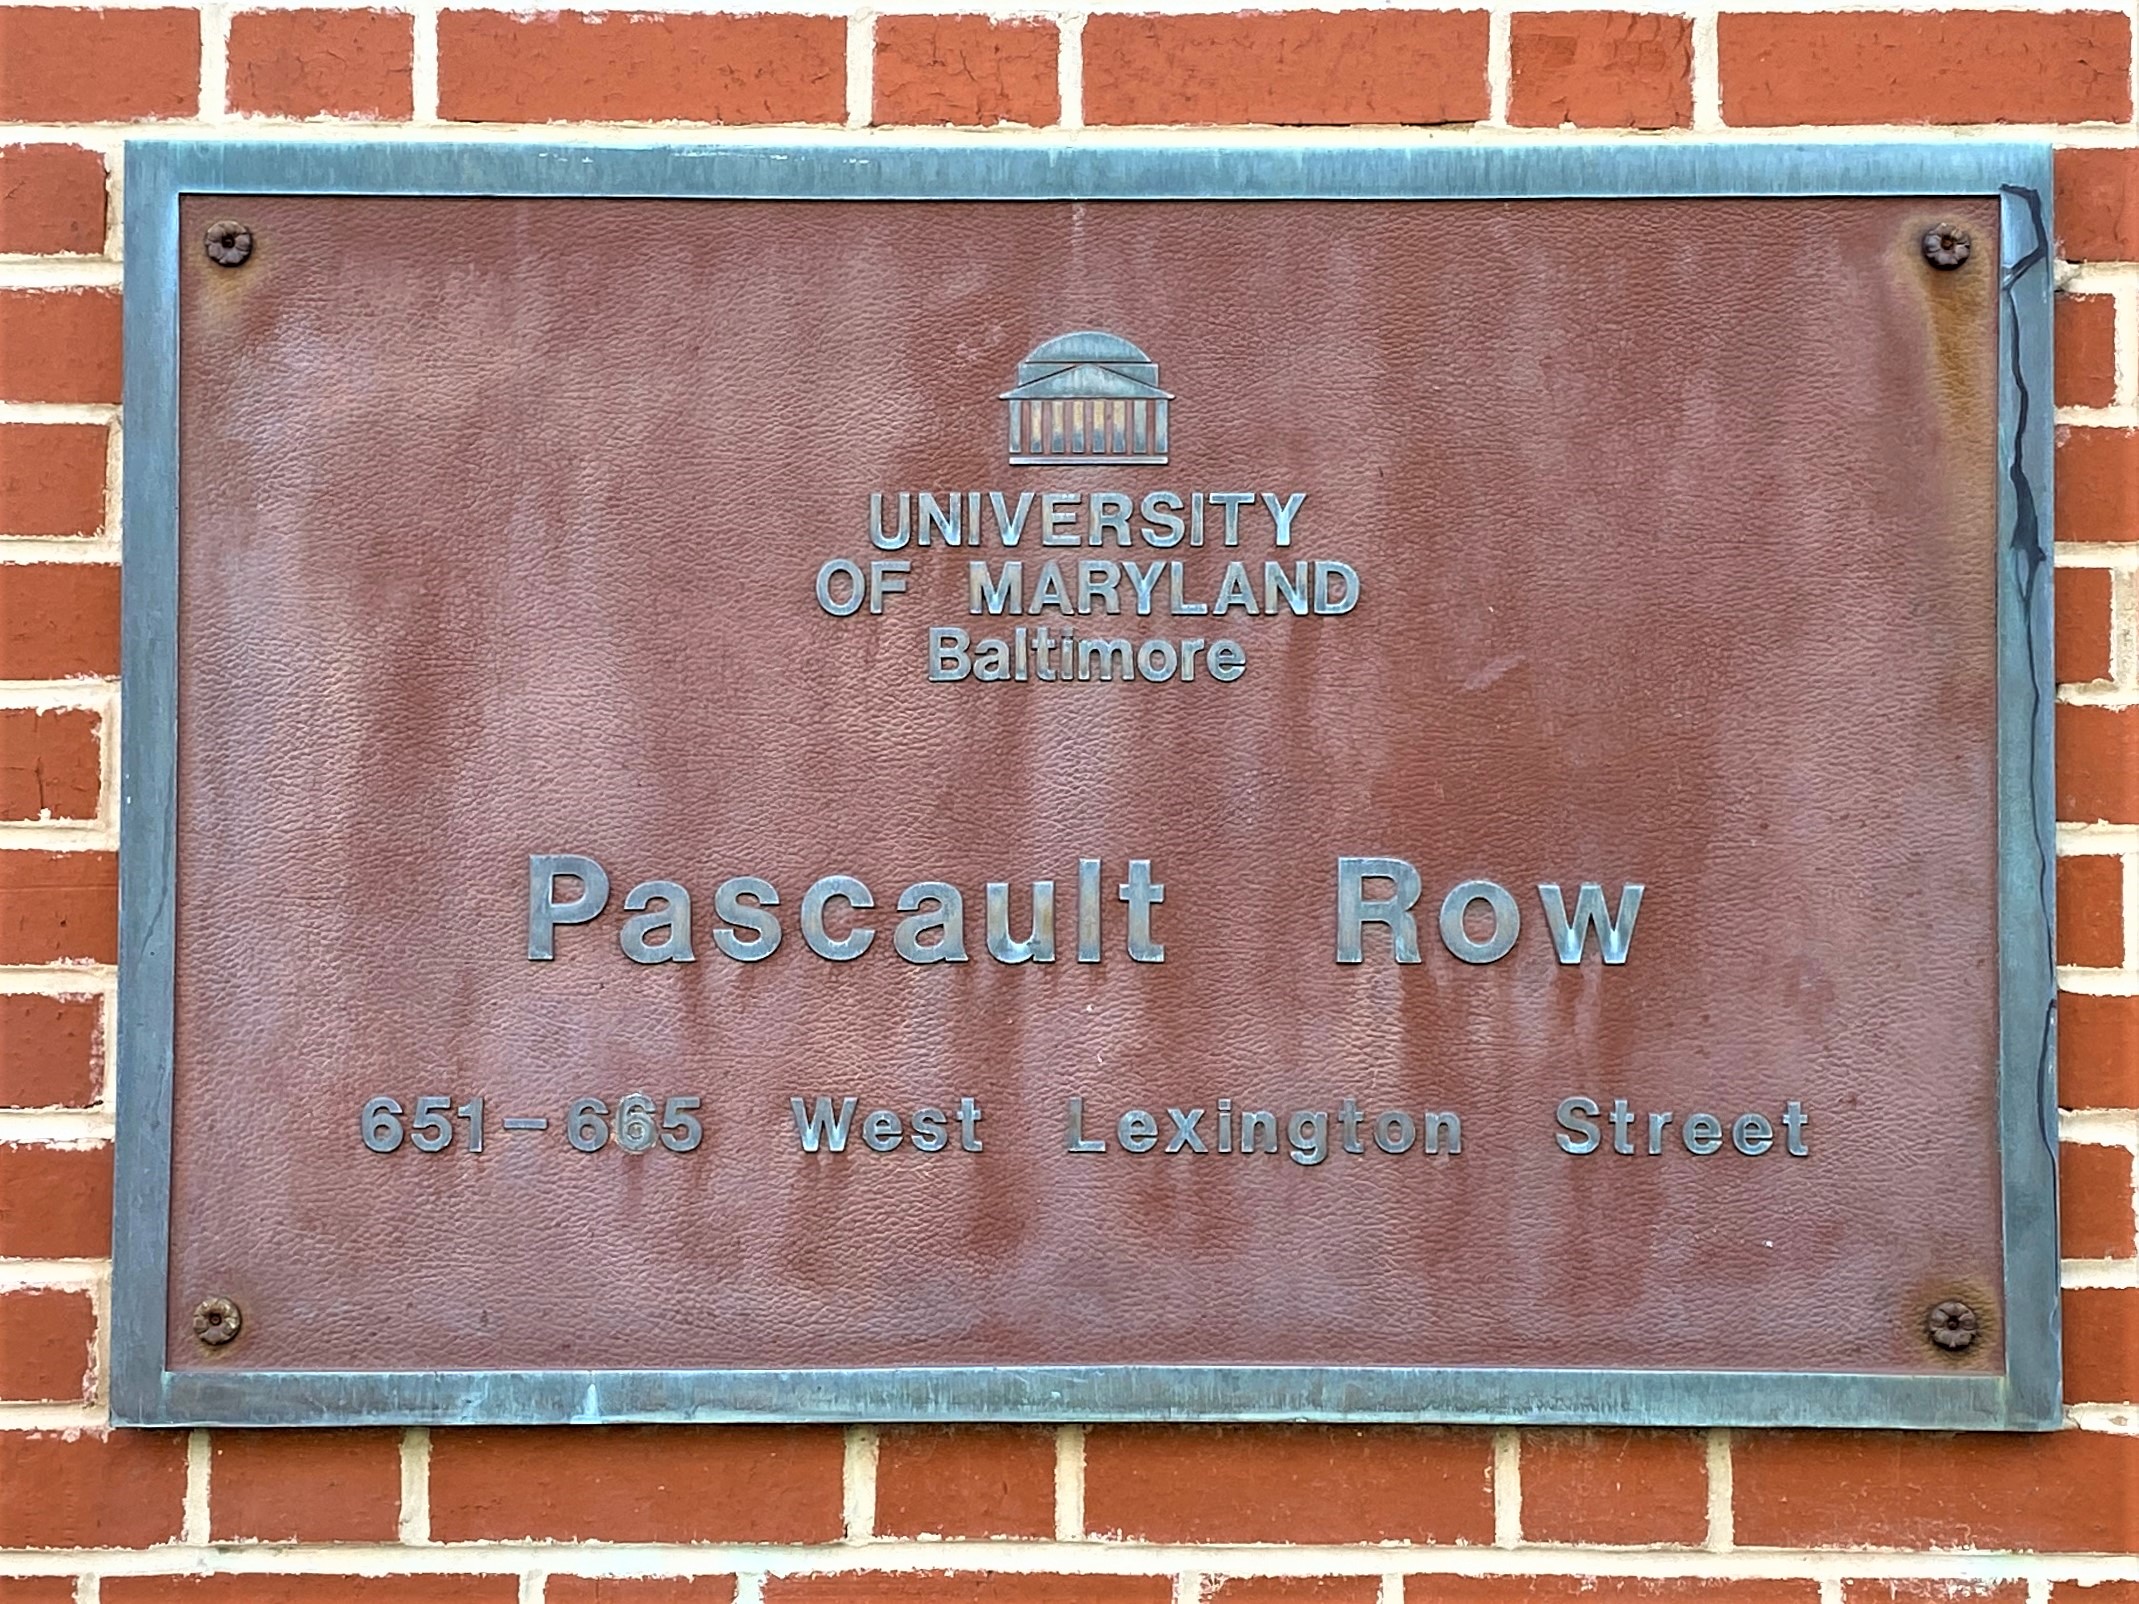 A photo of the Pascault Row building sign.